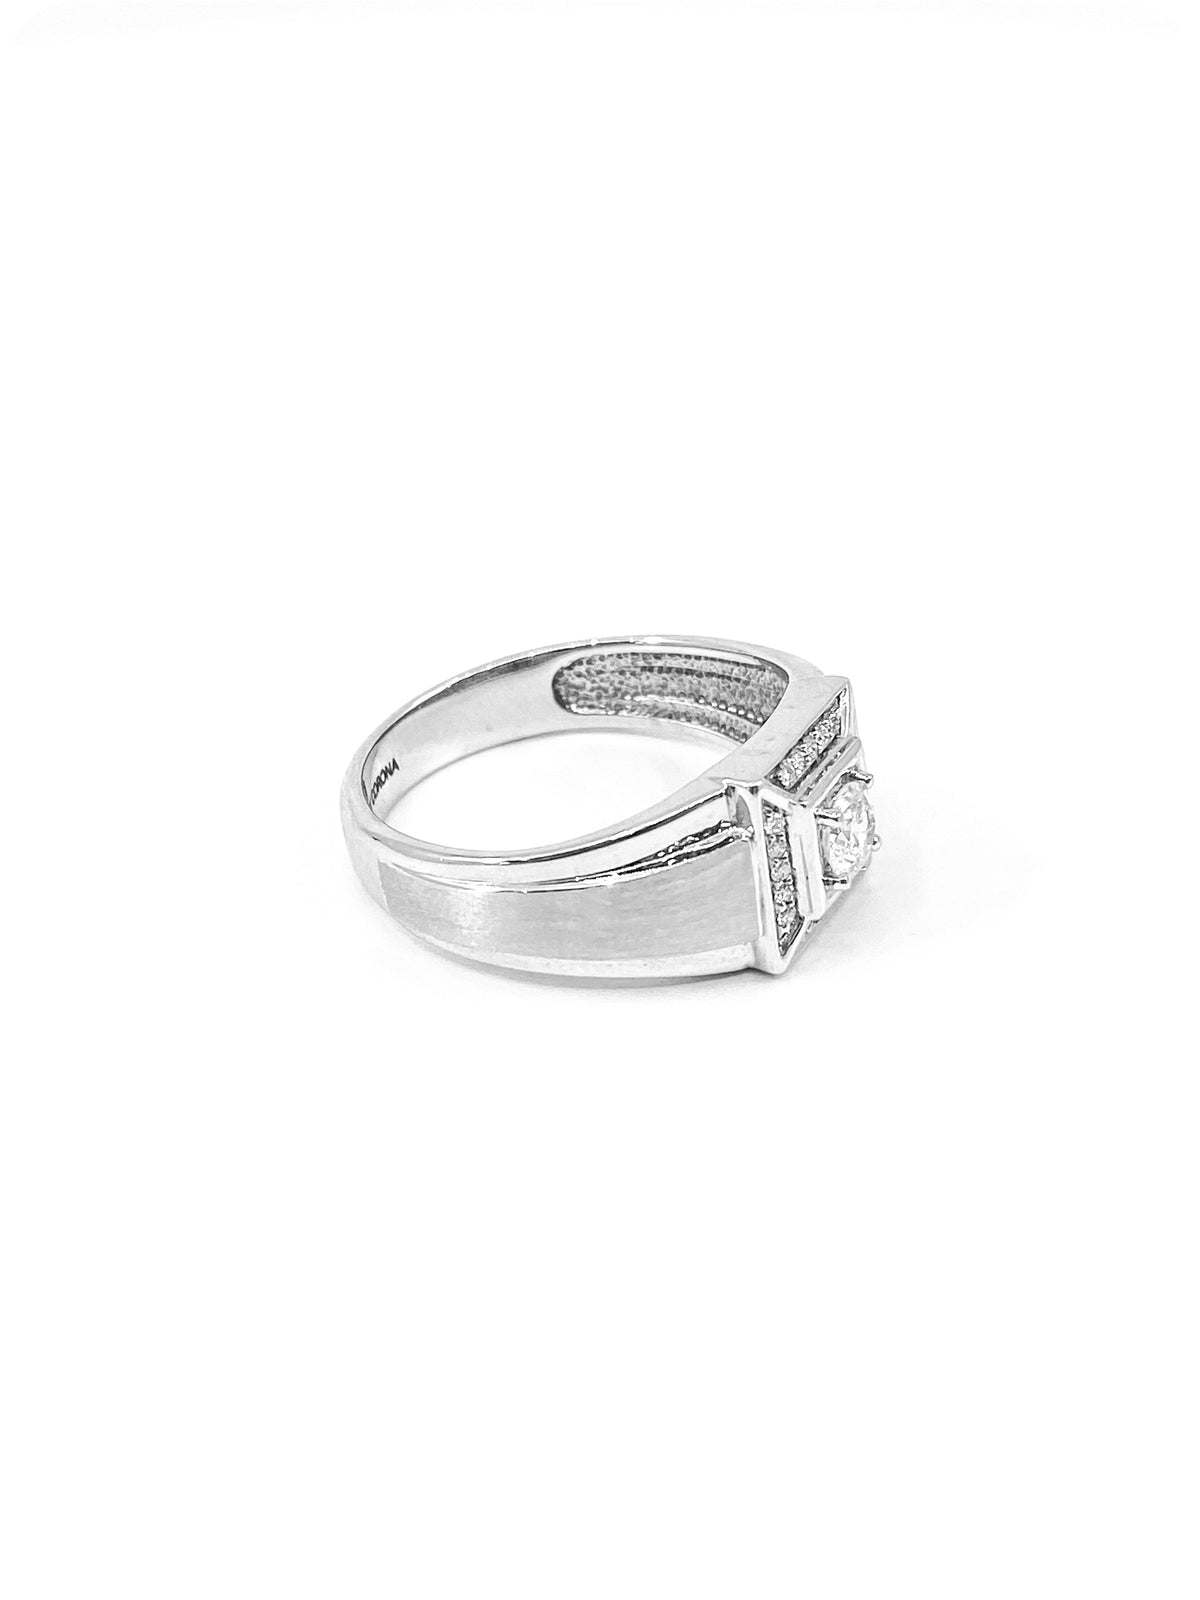 10K White Gold Gents 0.30cttw Canadian Diamond Ring, size 10